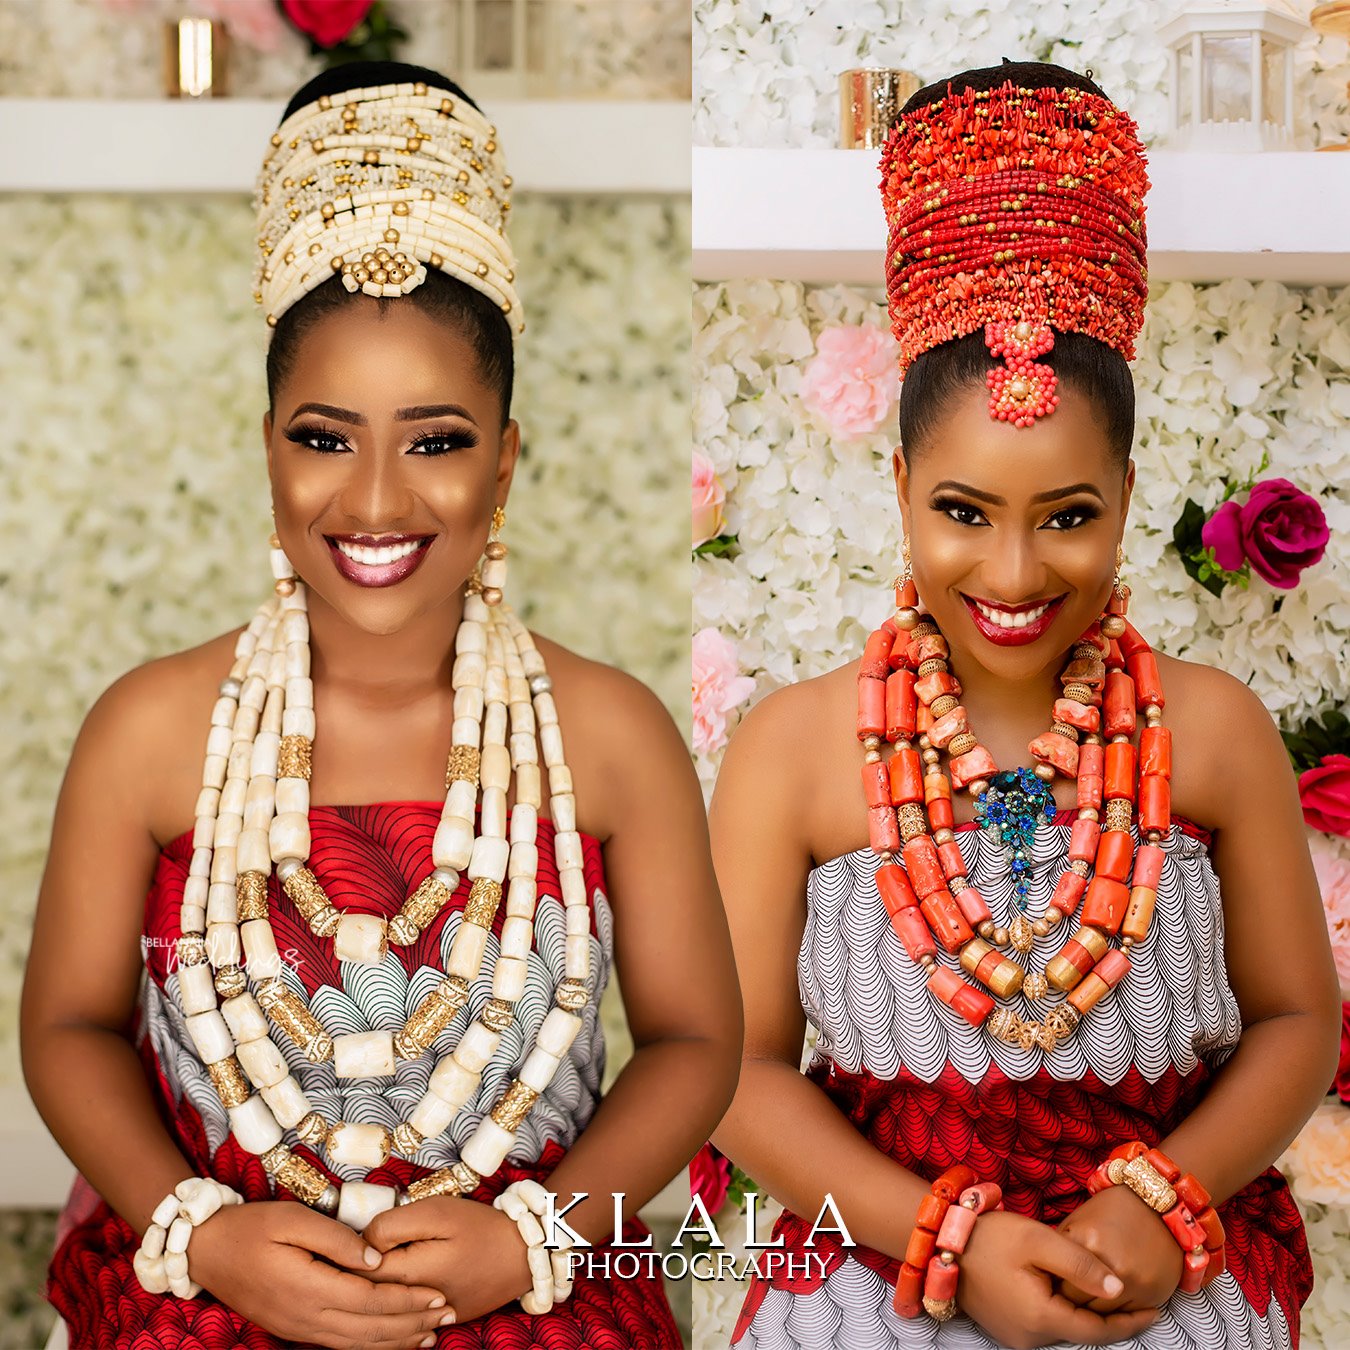 Which Look Gets Your Vote, White Ivory Beads or the Coral Beads